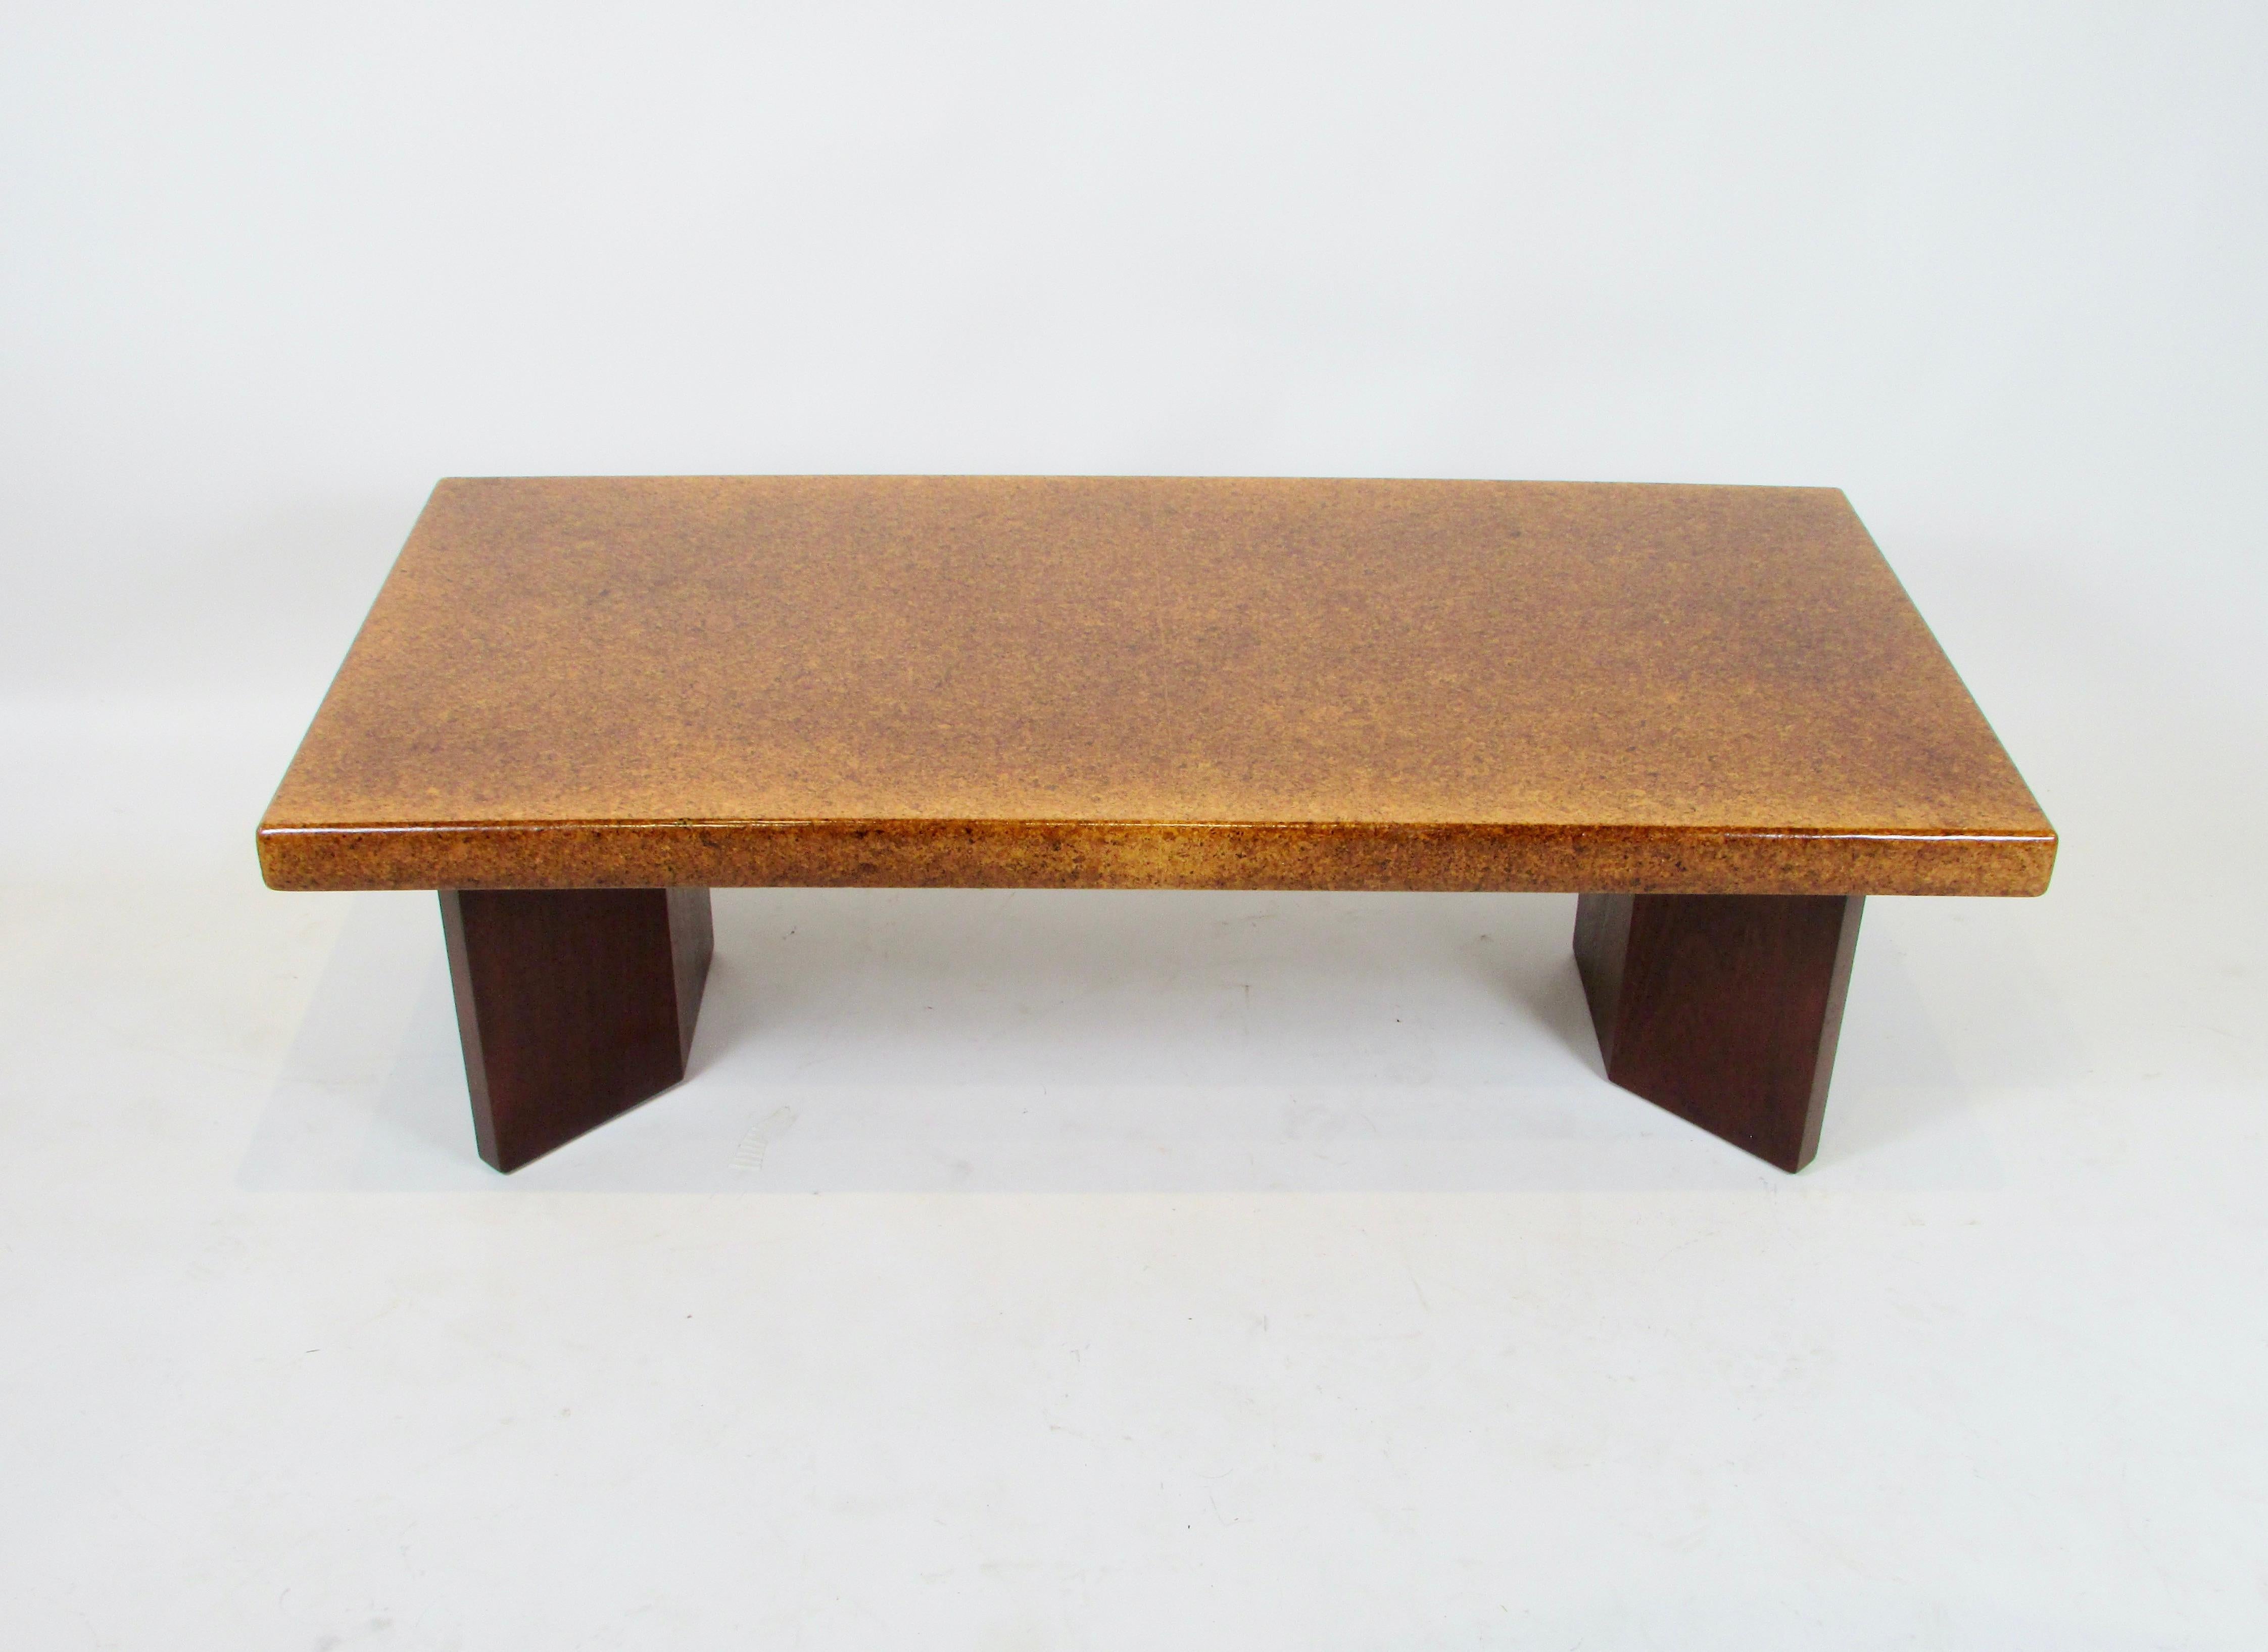  Paul T. Frankl  designed a large collection of mid century modern pieces for Johnson furniture . Introduced after the war this table is a fine example from that collection . Original cork top sits on mahogany plinth bases . Both top and bases have